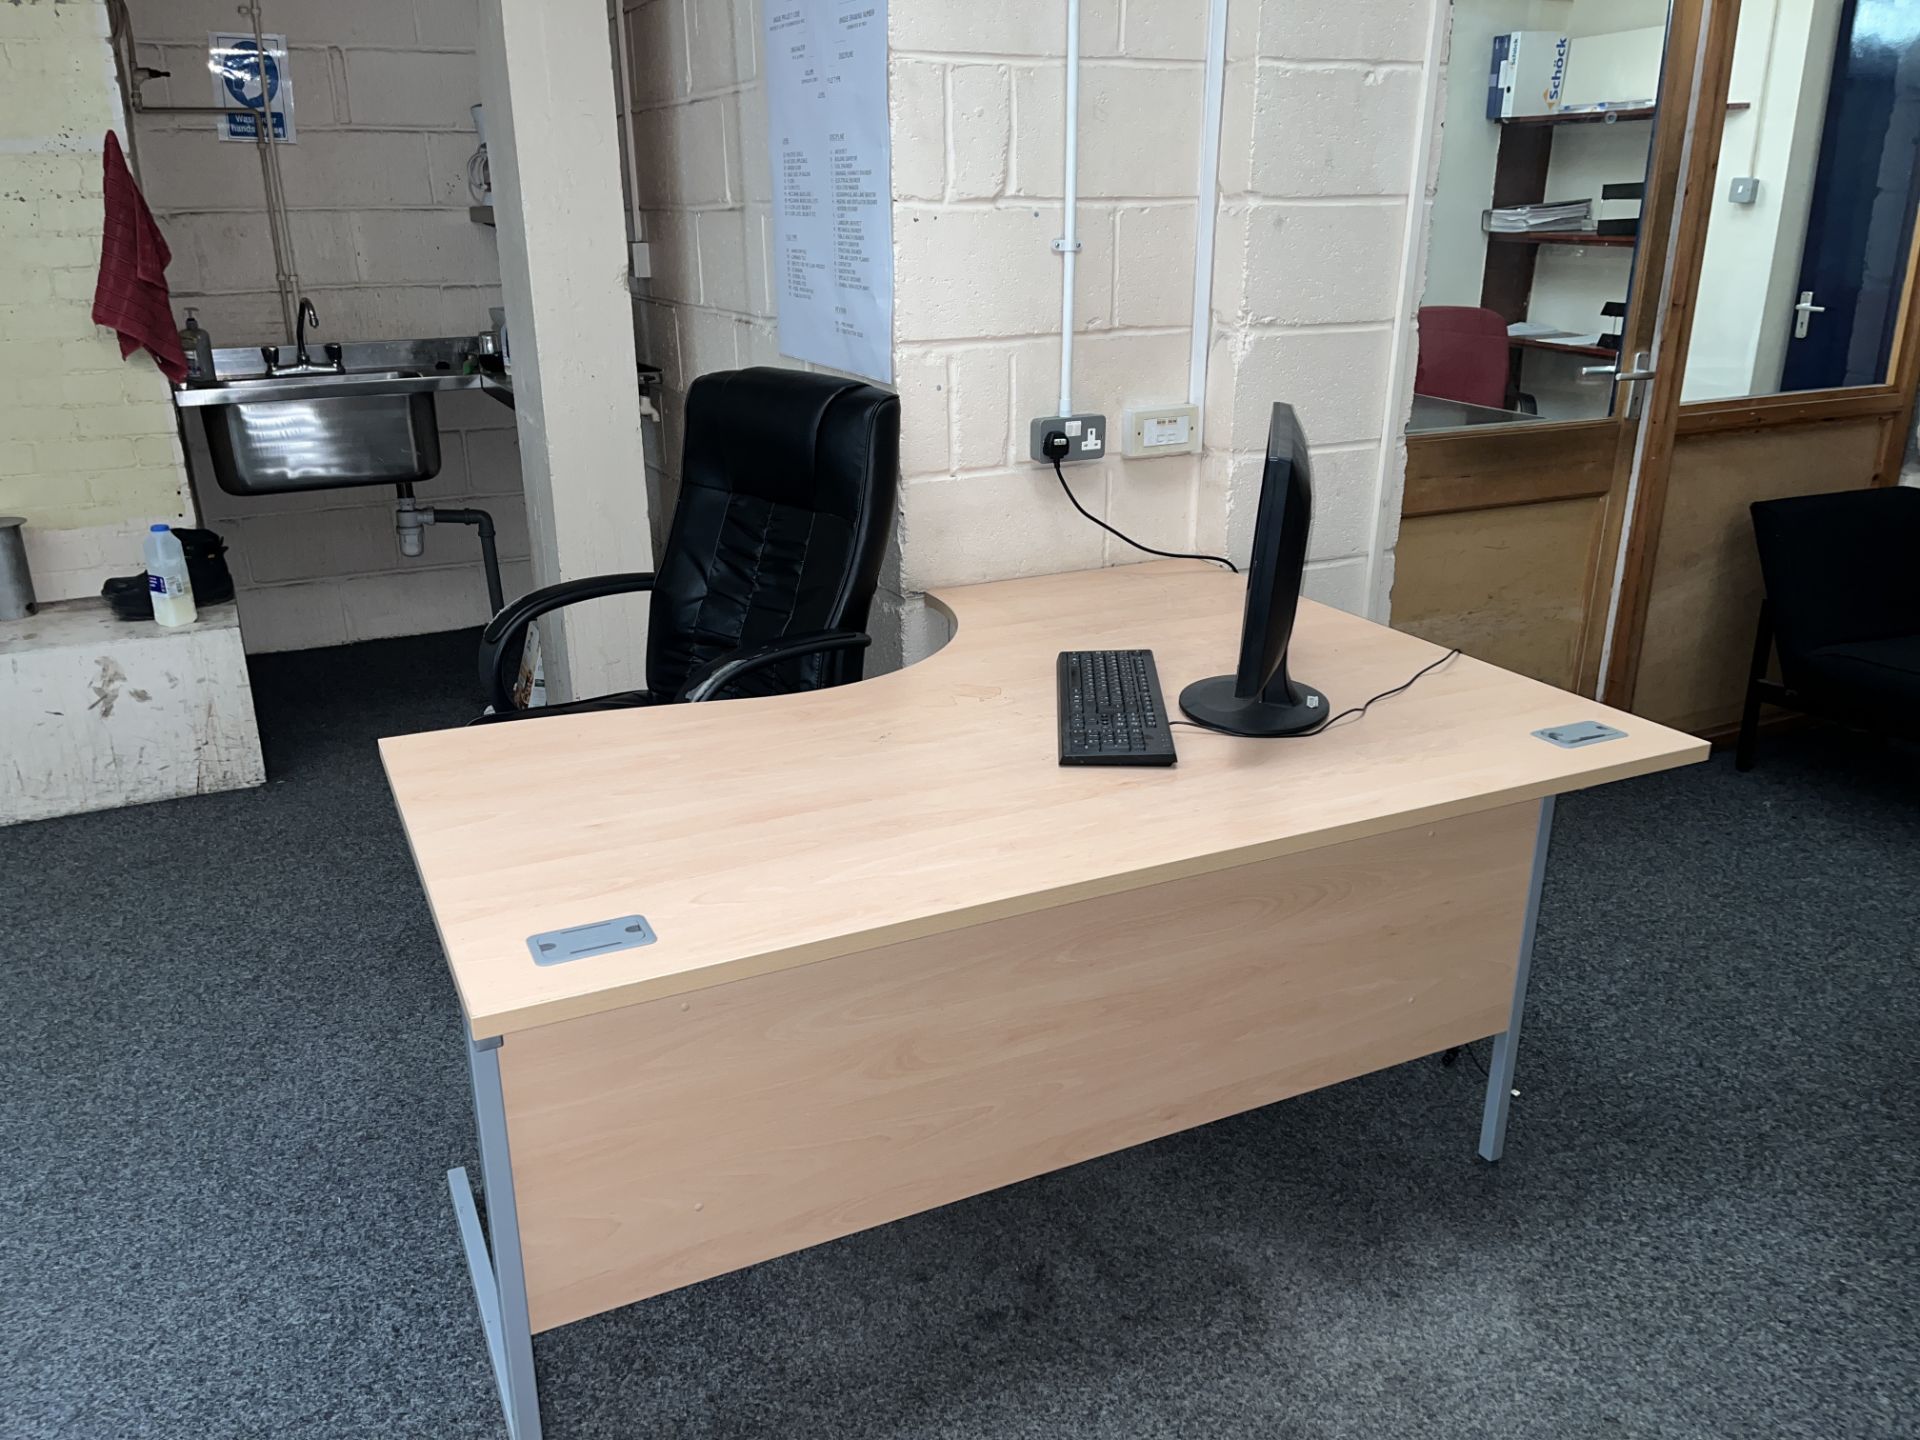 CONTENTS TO OFFICE 3 - INCLUDING 5 OFFICE DESKS, FILING CABINETS, PCS, FILING CABINETS, STAINLESS - Image 2 of 9